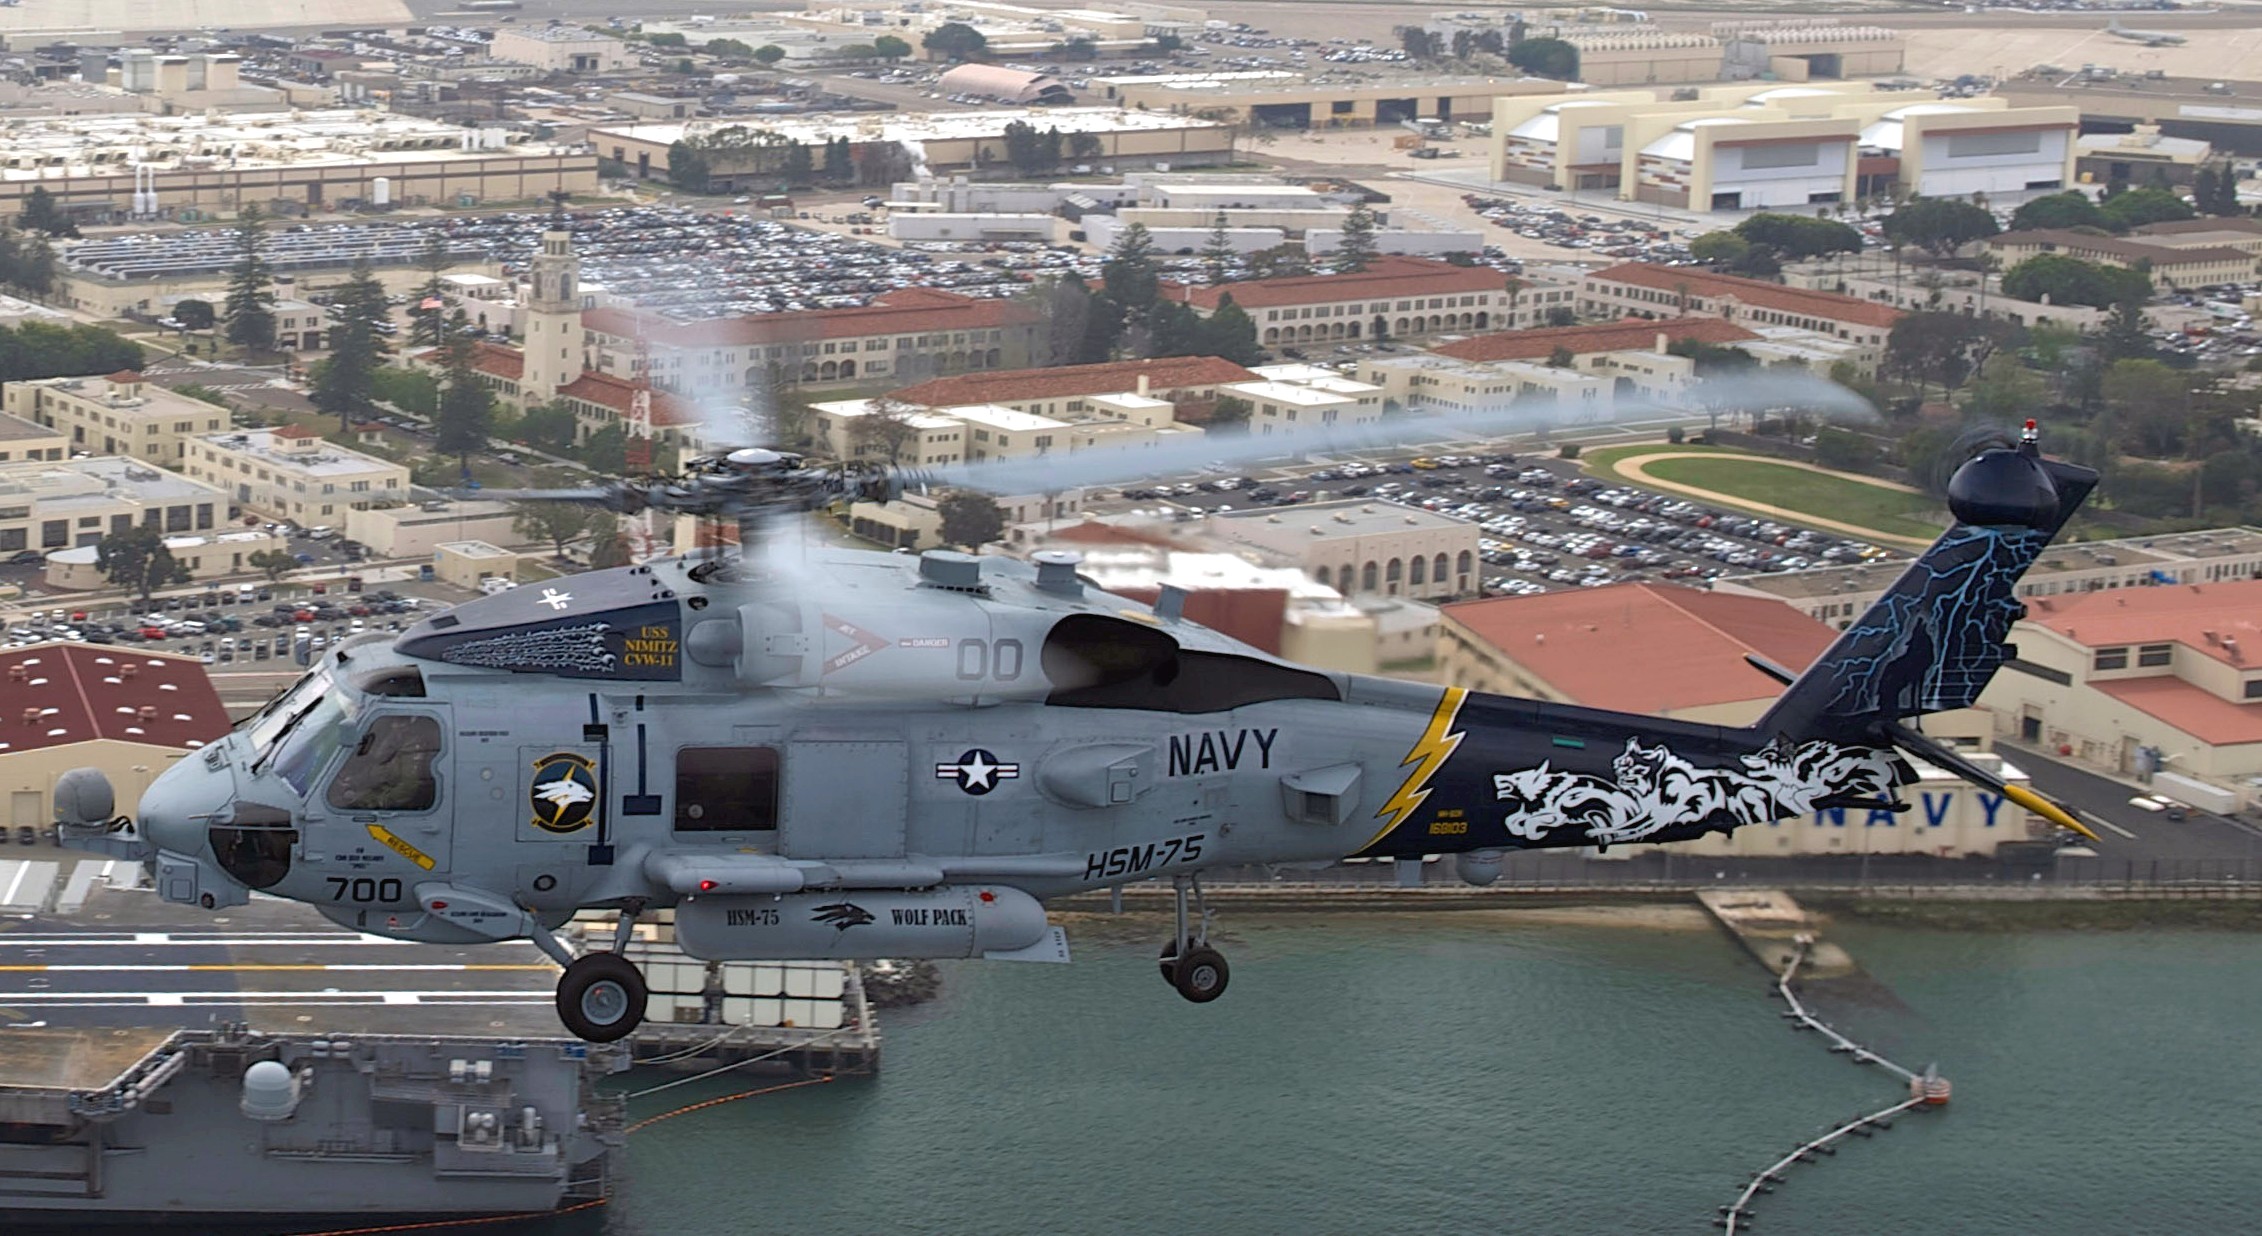 hsm-75 wolf pack helicopter maritime strike squadron mh-60r seahawk san diego california 15